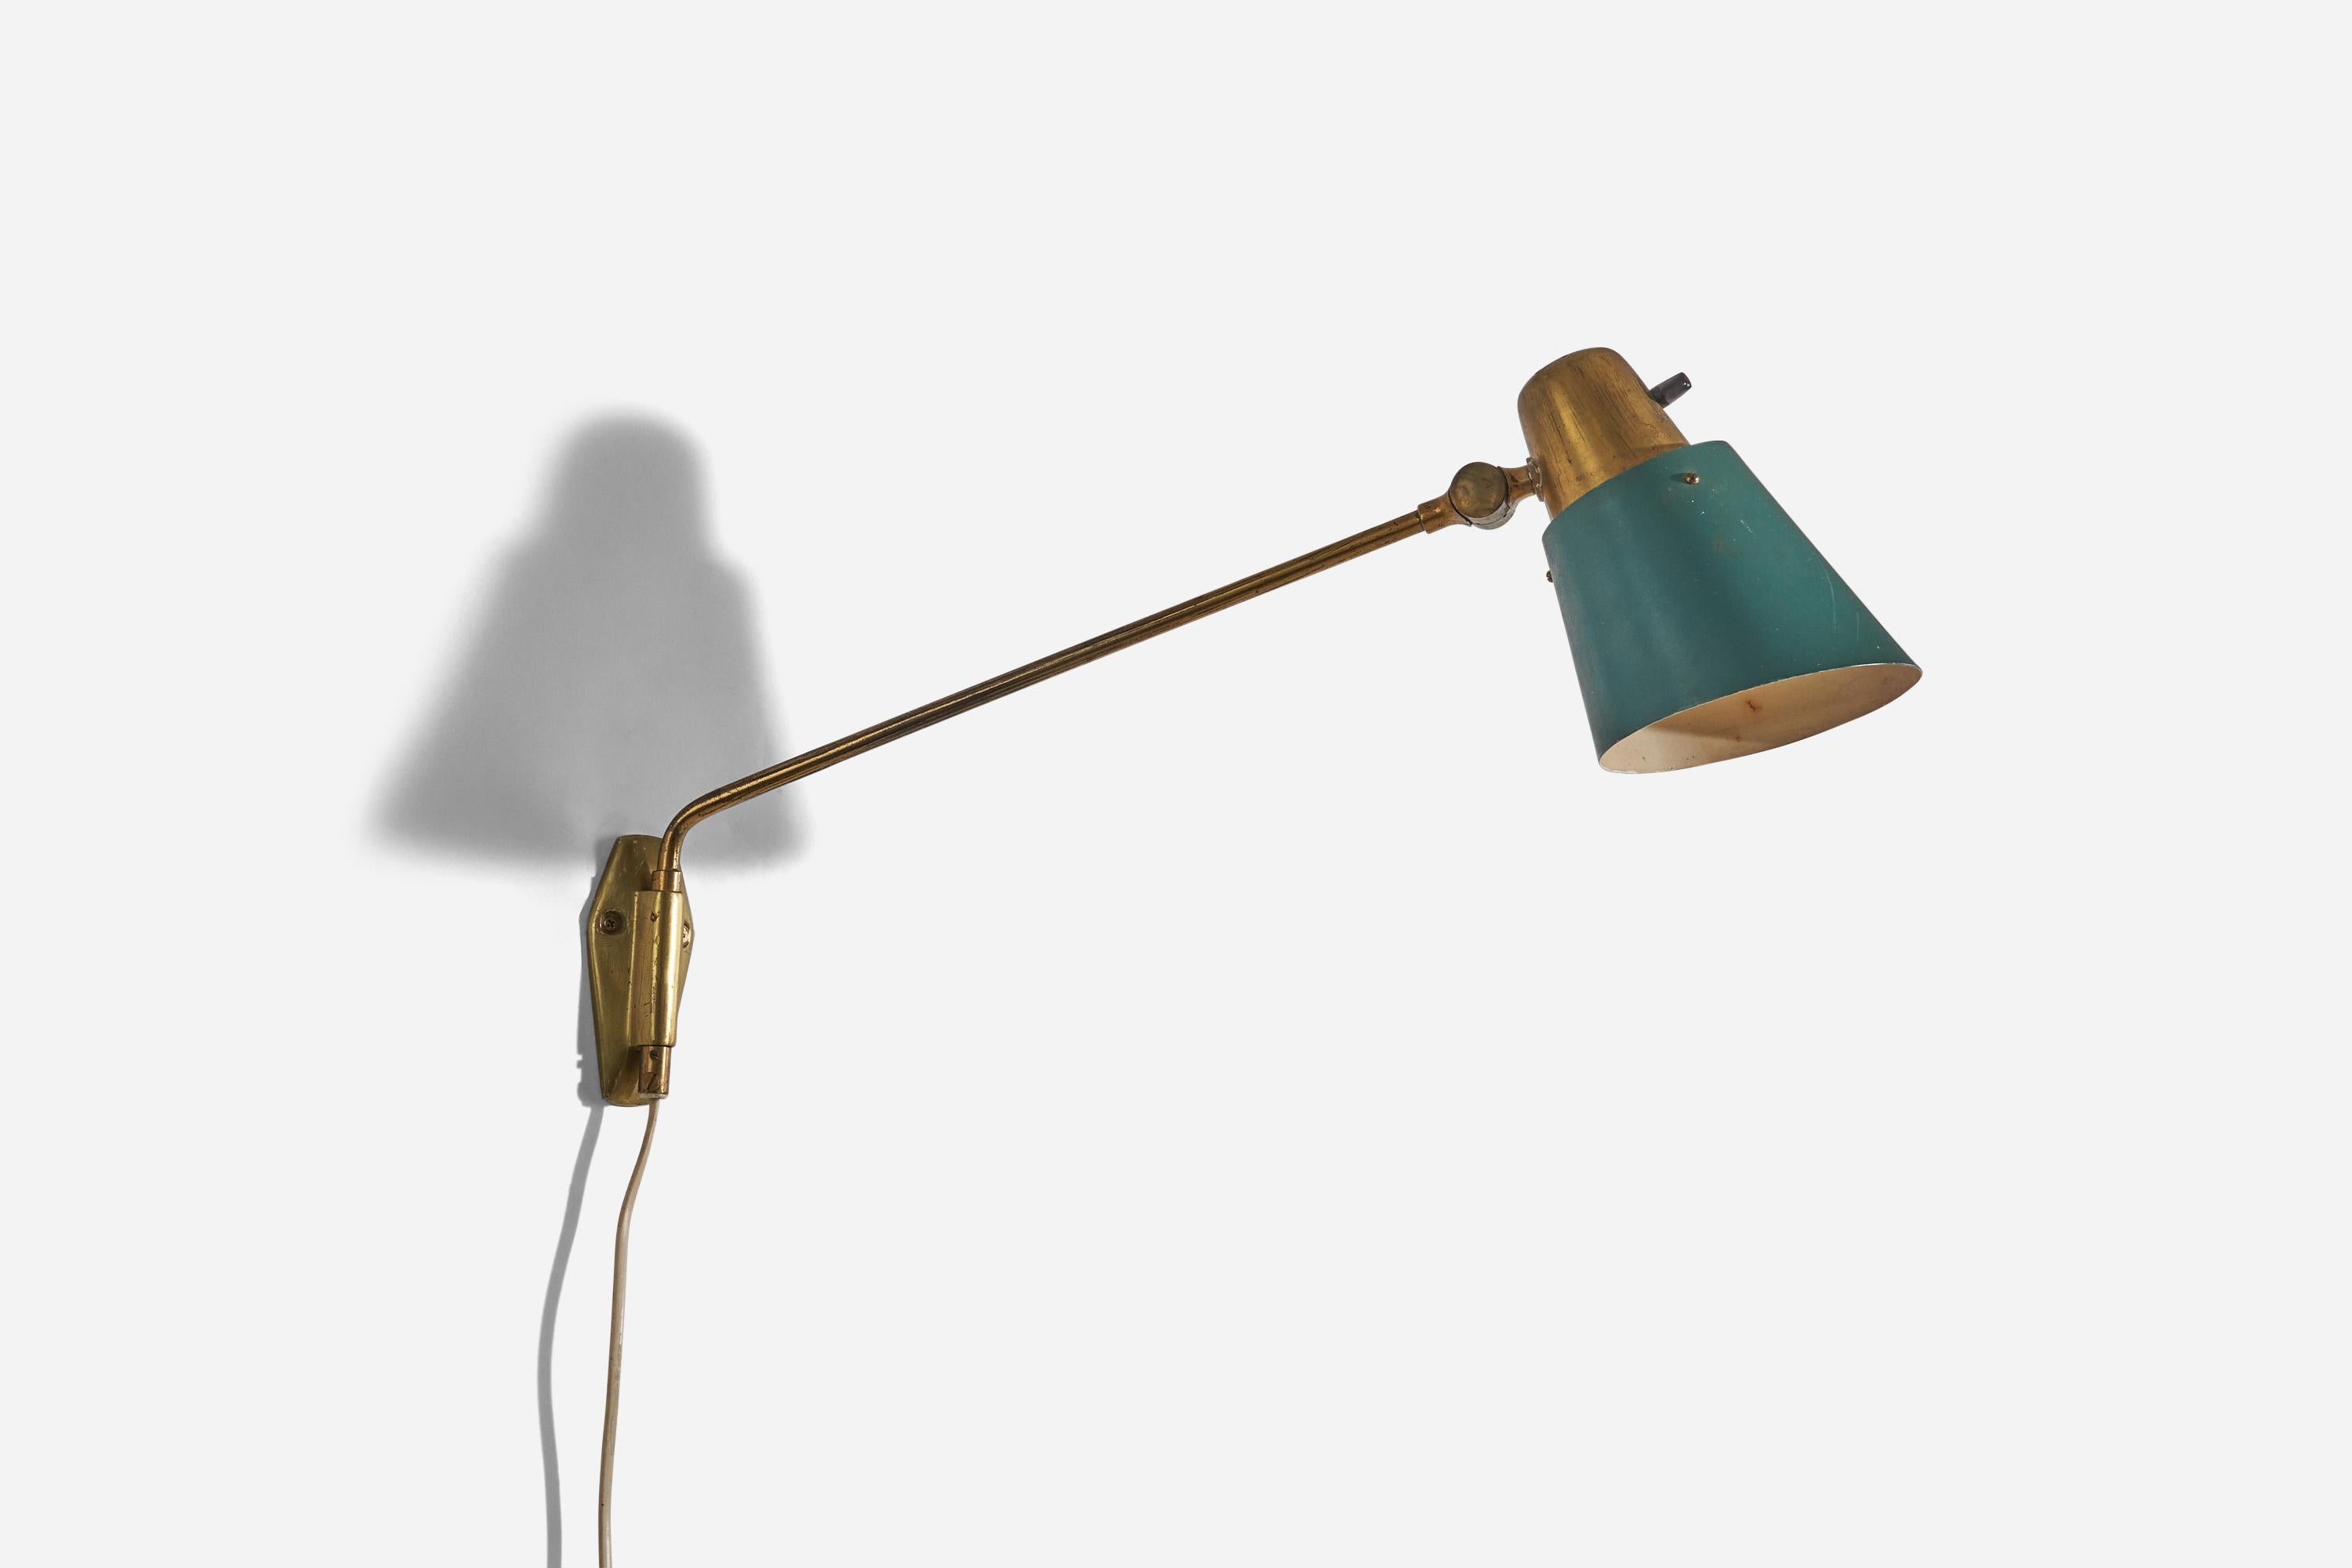 A brass and green lacquered metal wall light designed and produced in Sweden, c. 1940s.

Variable dimensions, measured as illustrated in the first image. 
Dimensions of back plate (inches) : 4.5 x 2 x 1.12 (H x W x D).